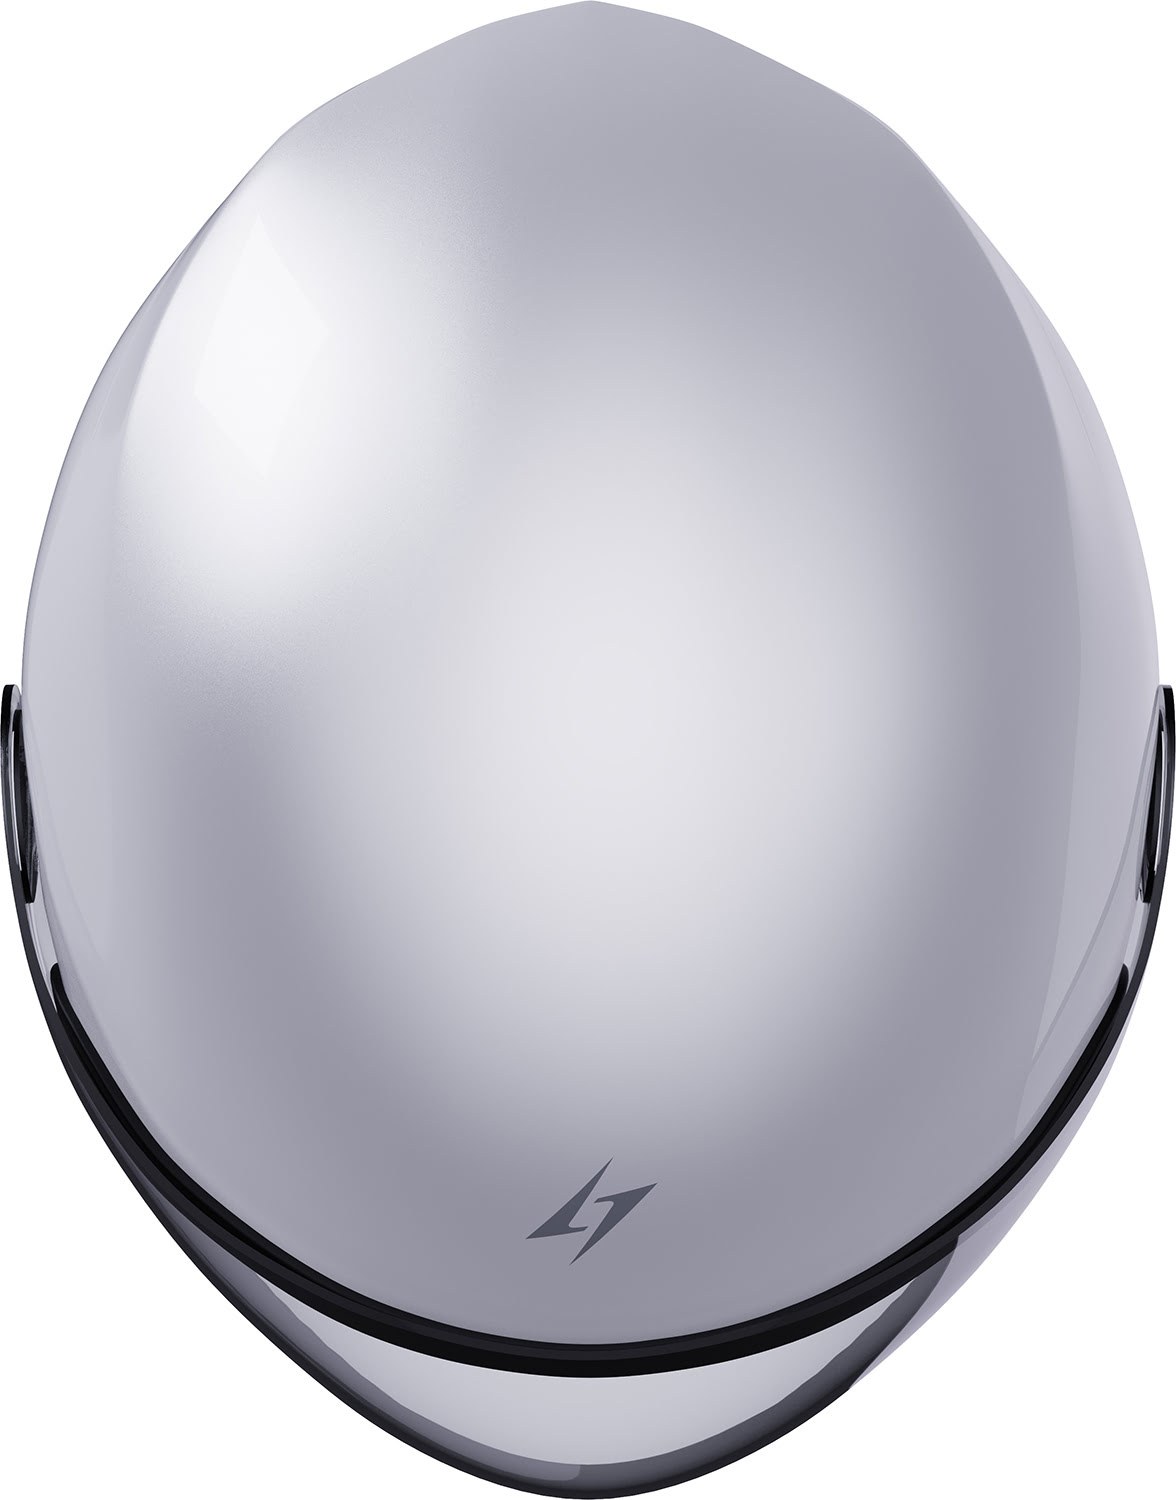 Helmet ACE White Pearly STORMER 